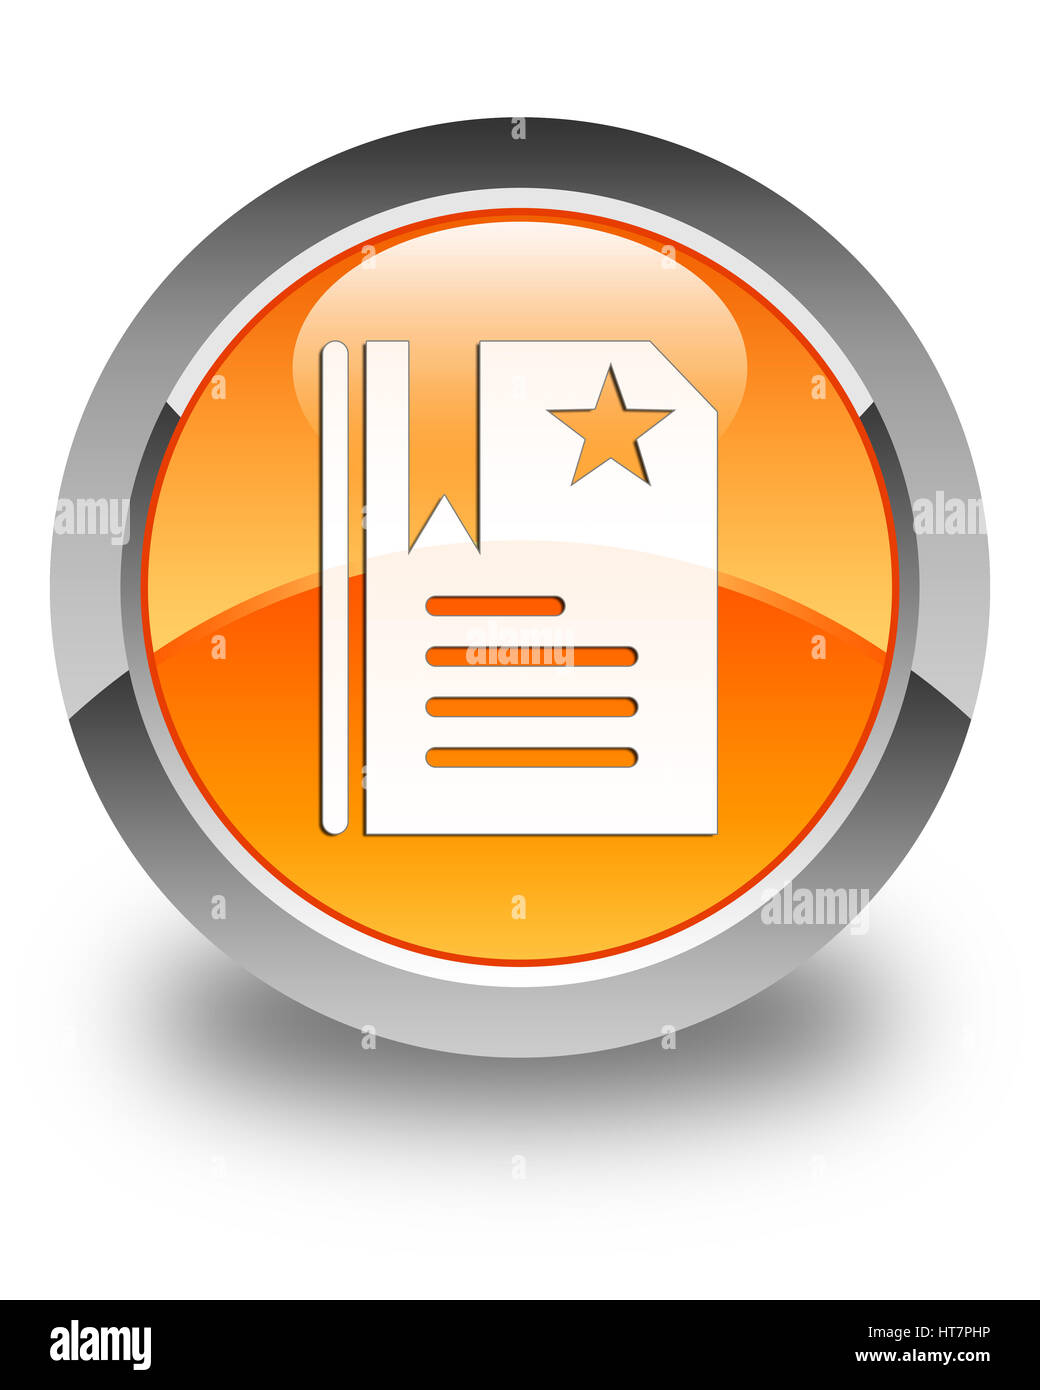 Bookmark icon isolated on glossy orange round button abstract illustration Stock Photo